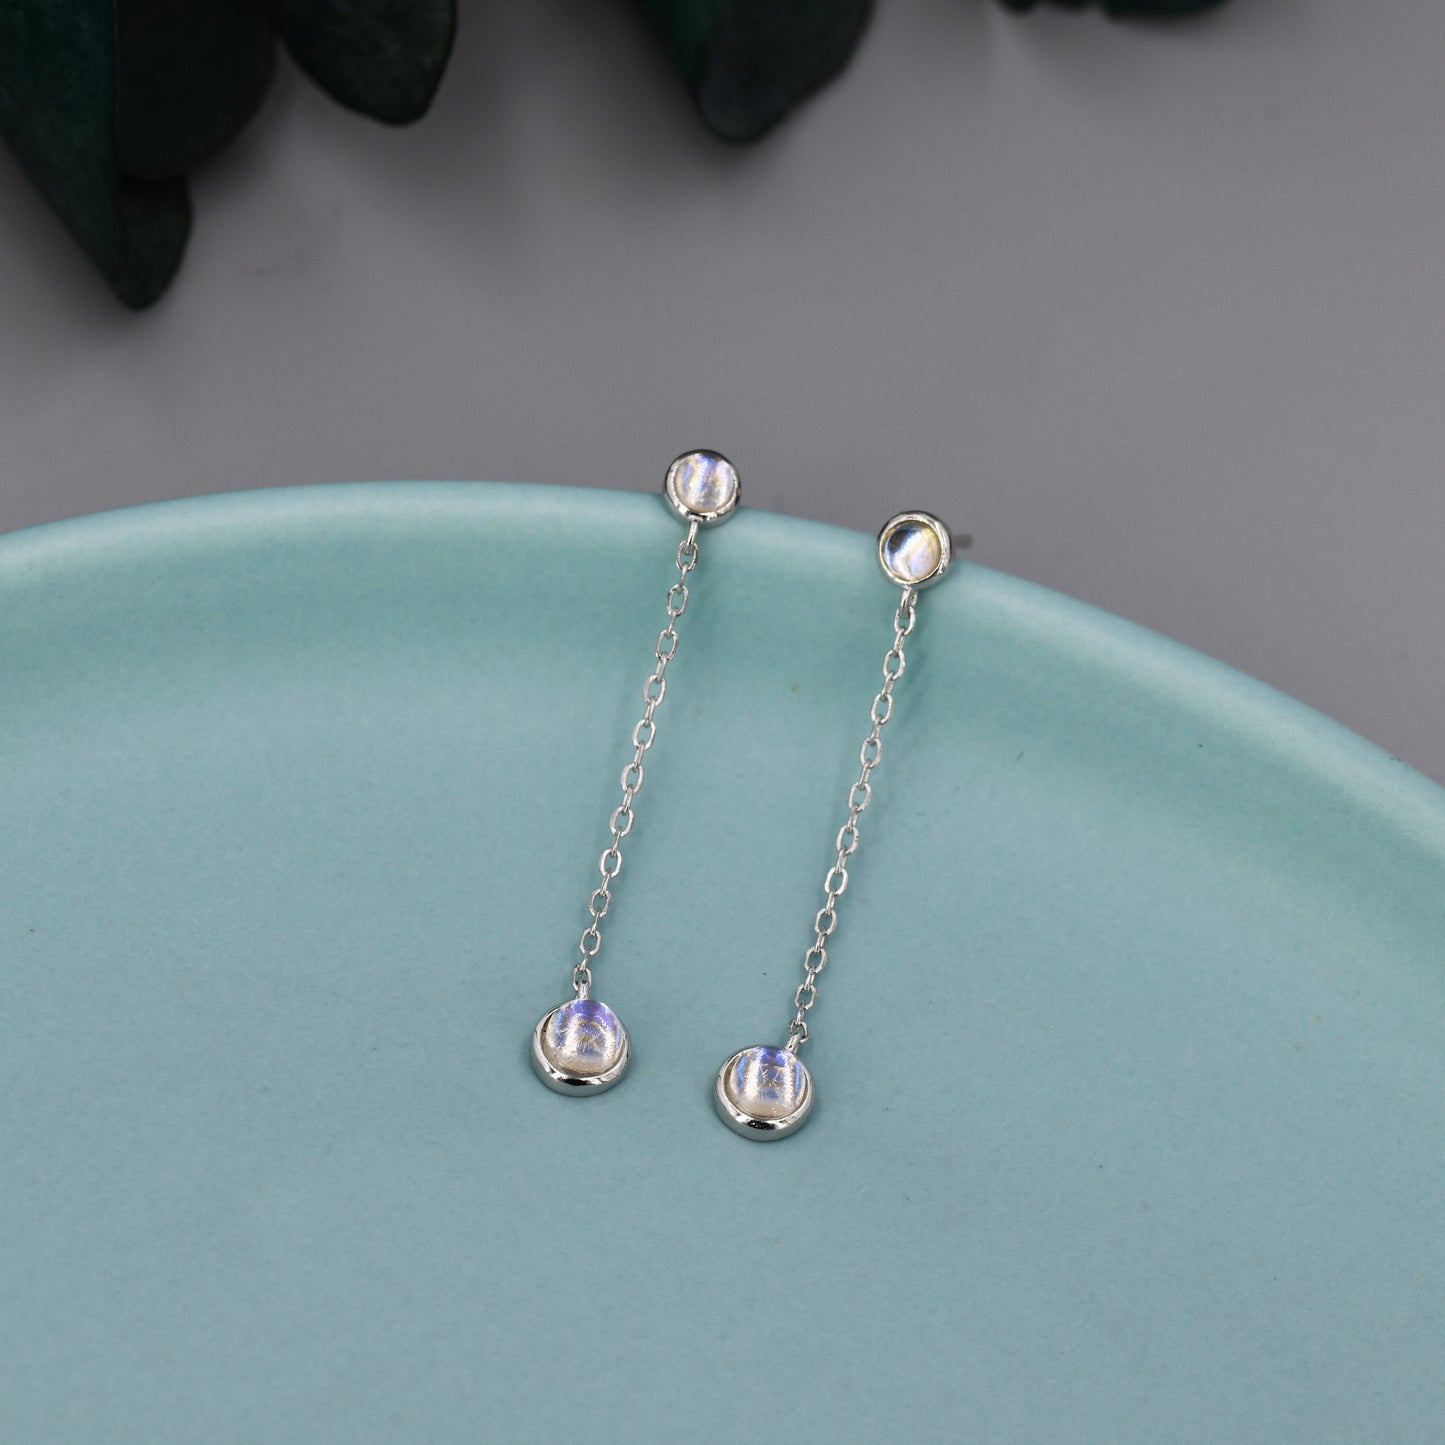 Double Moonstone Dangle Earrings in Sterling Silver,  Silver or Gold, Round Lab Moonstone Bezel Earrings, Two Moonstone Earrings